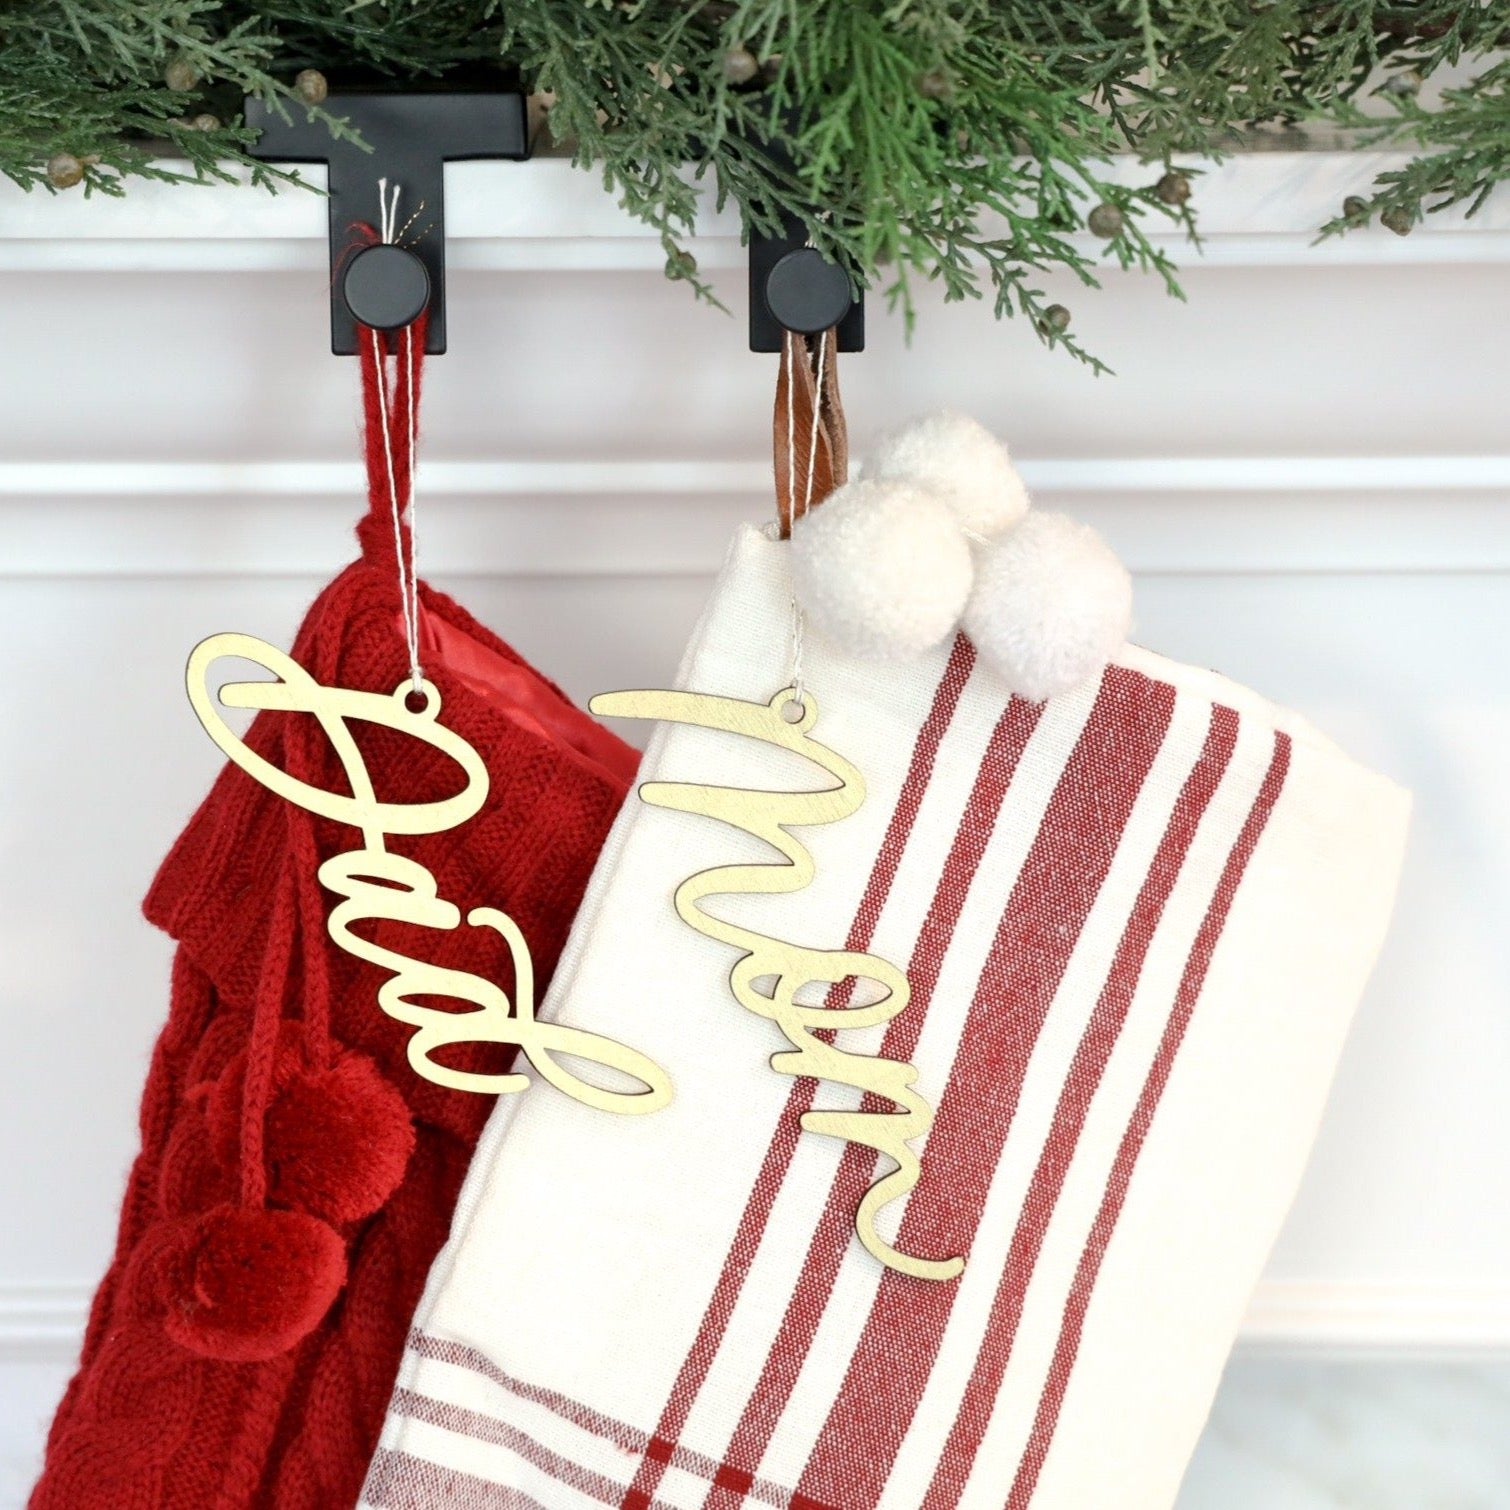 Personalized Stocking Name Tags – Agape Calligraphy